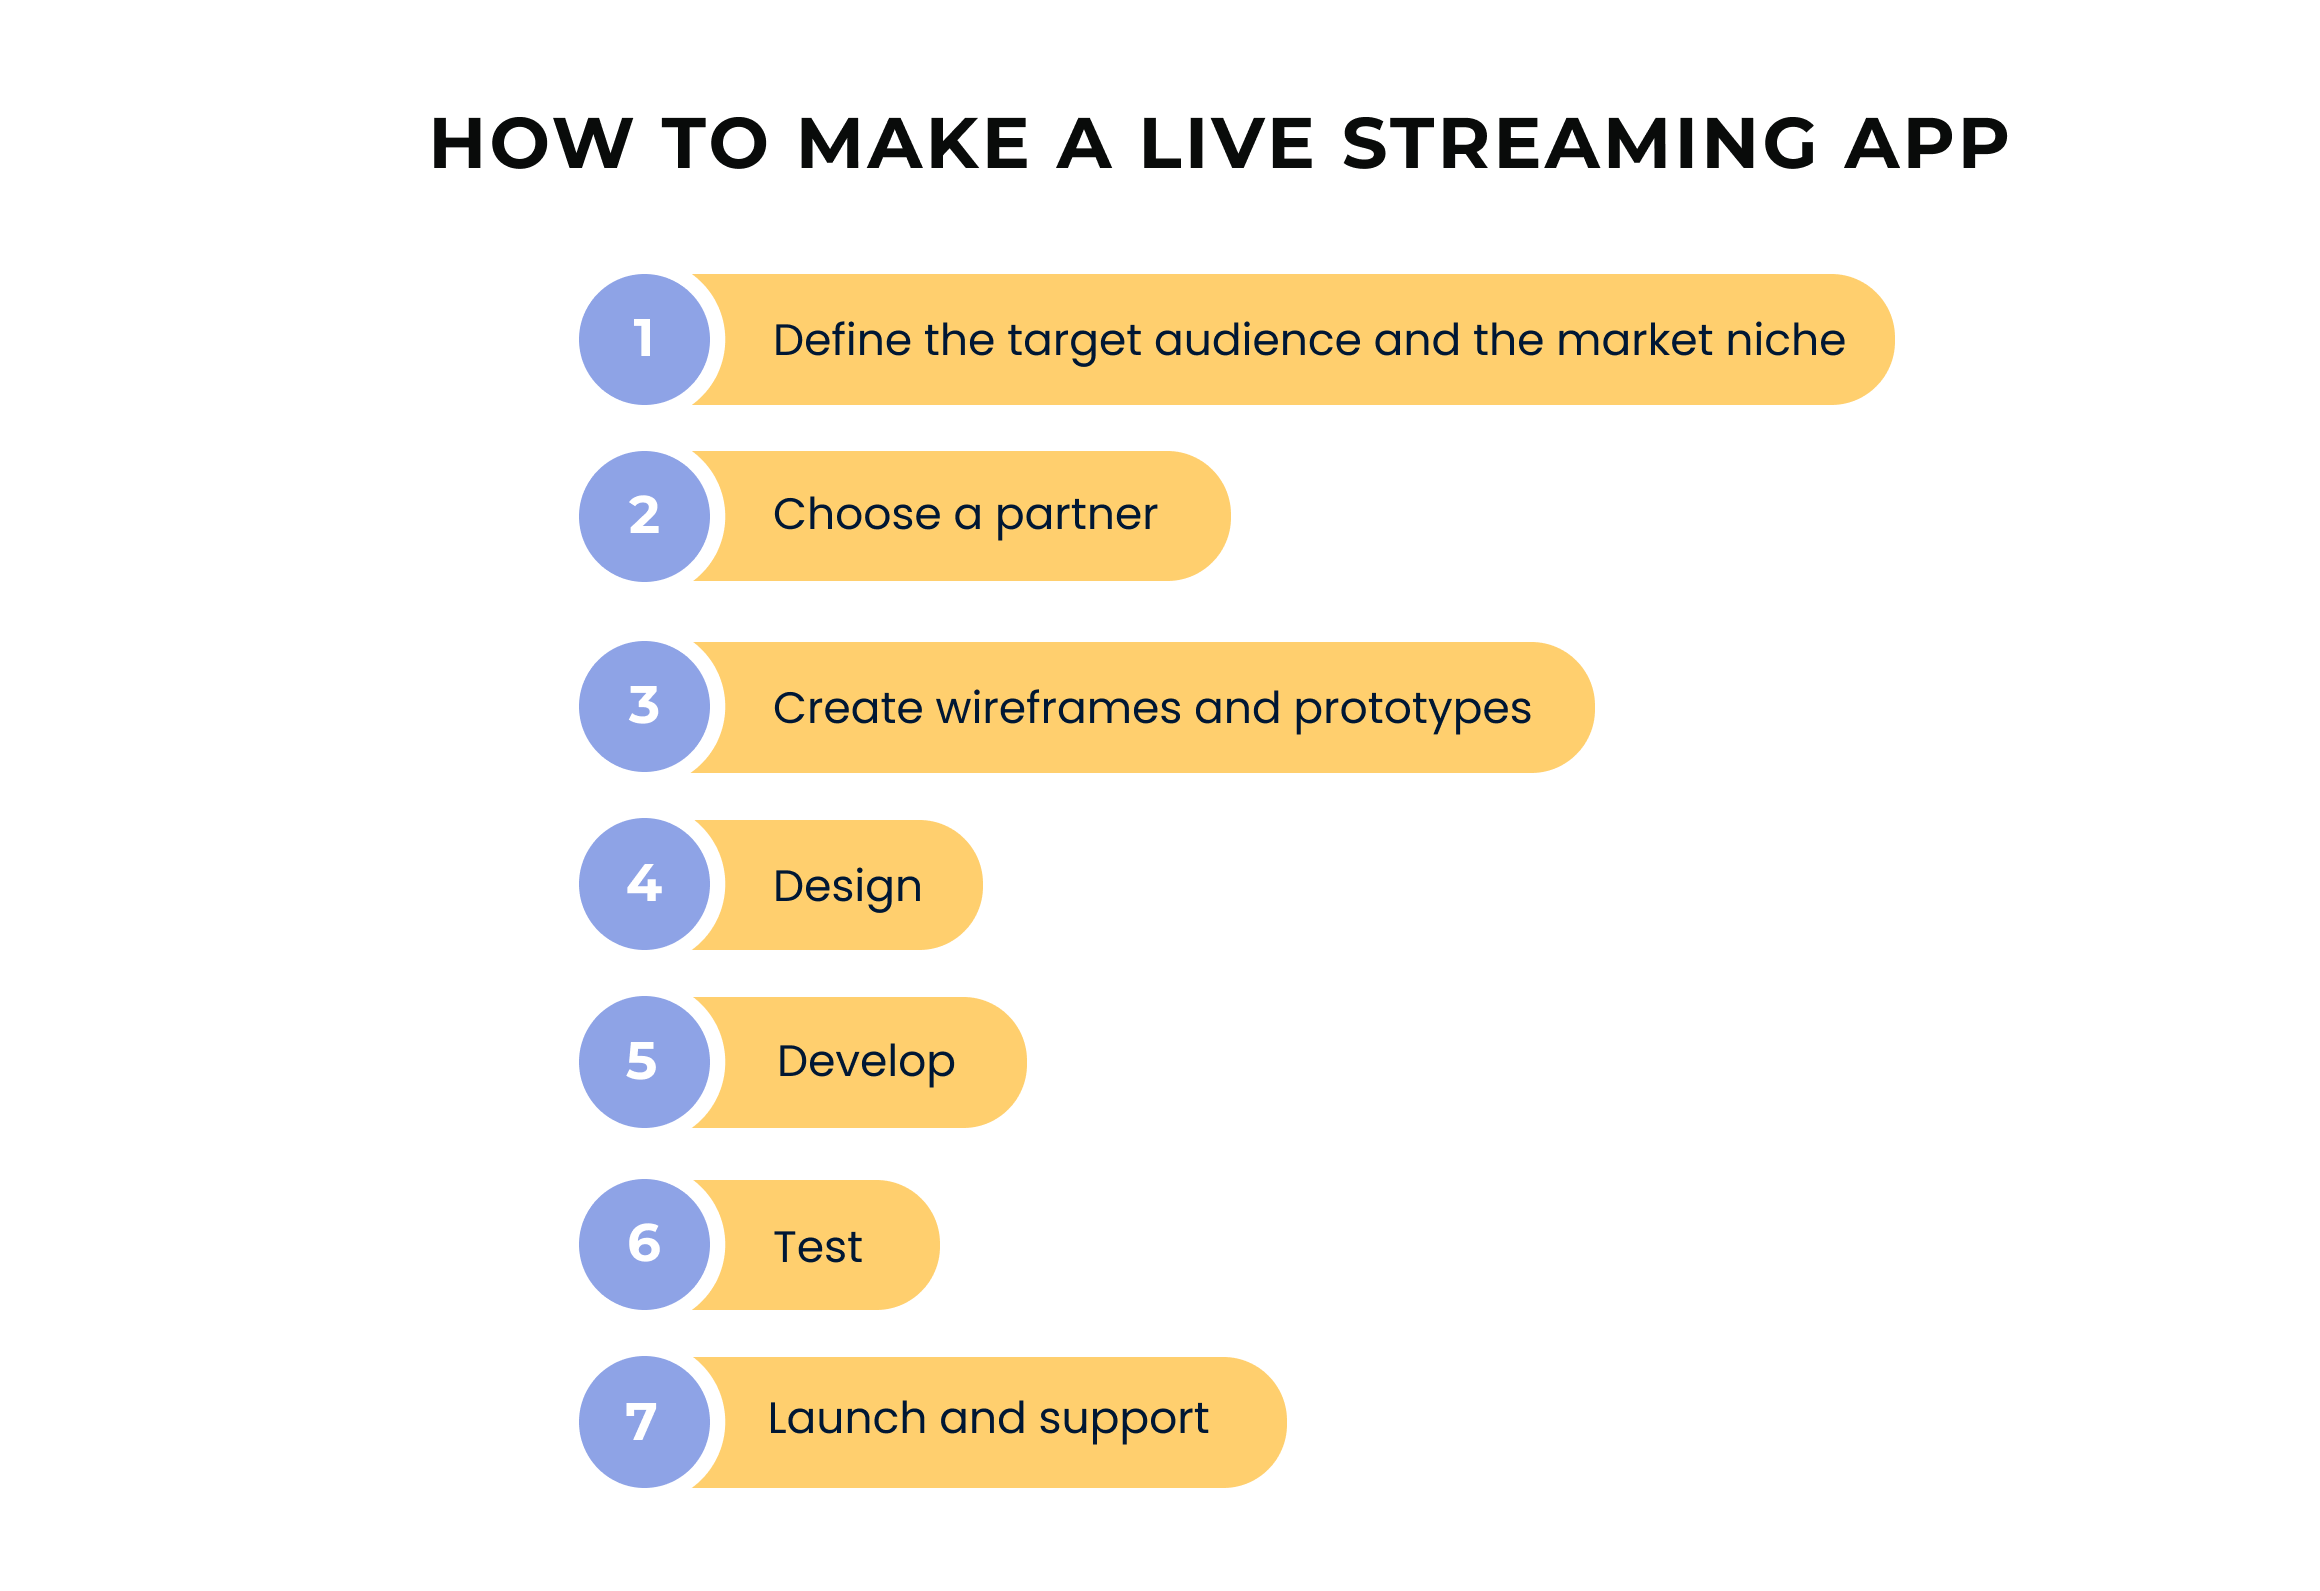 Steps to build an app with live streaming